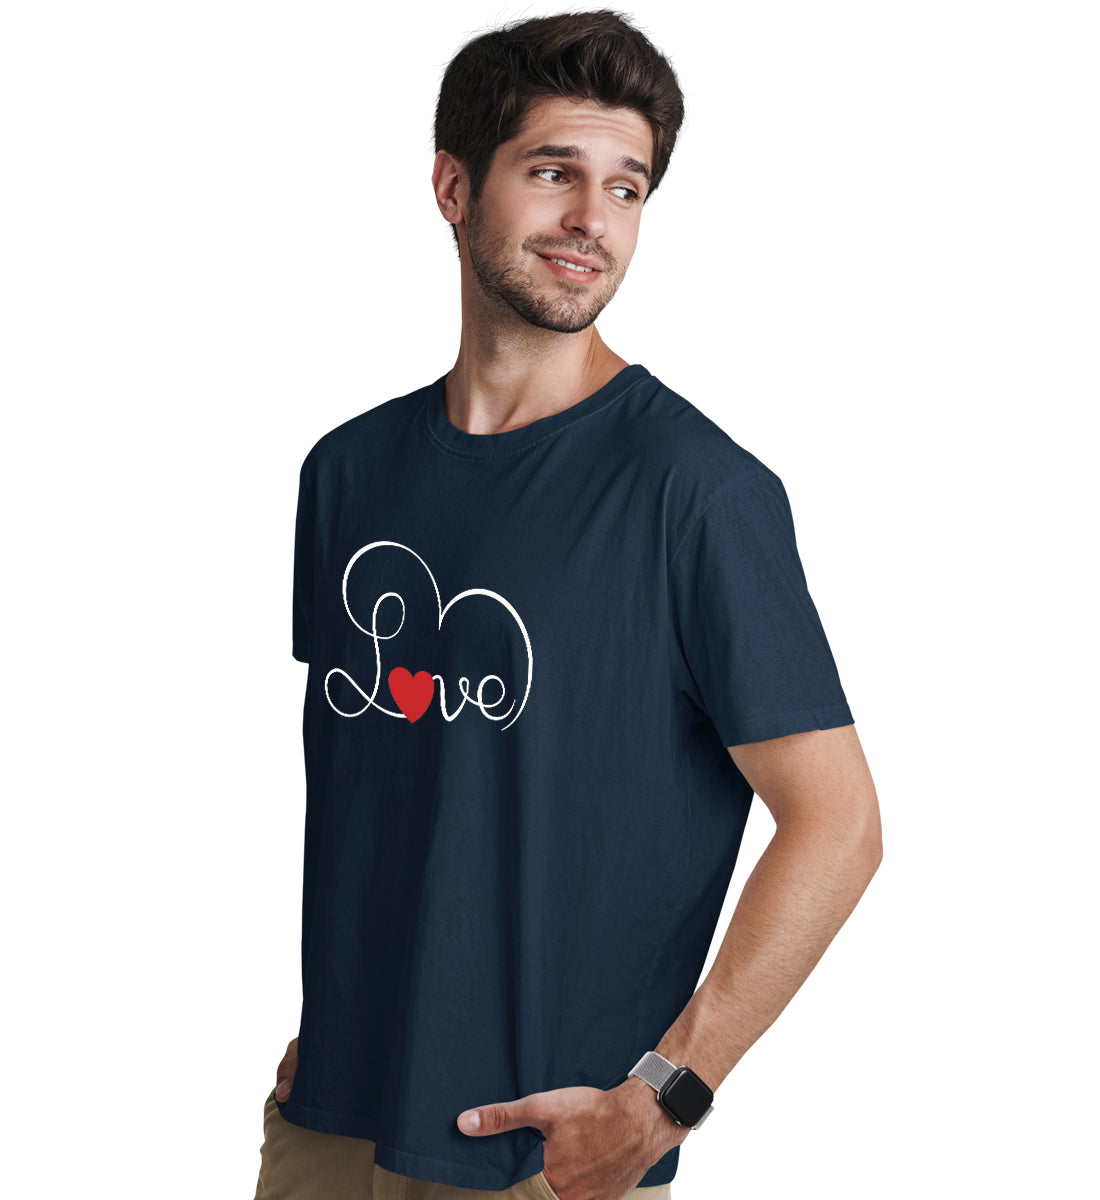 Couple Love Matching Printed Tshirts (Pack Of 2)